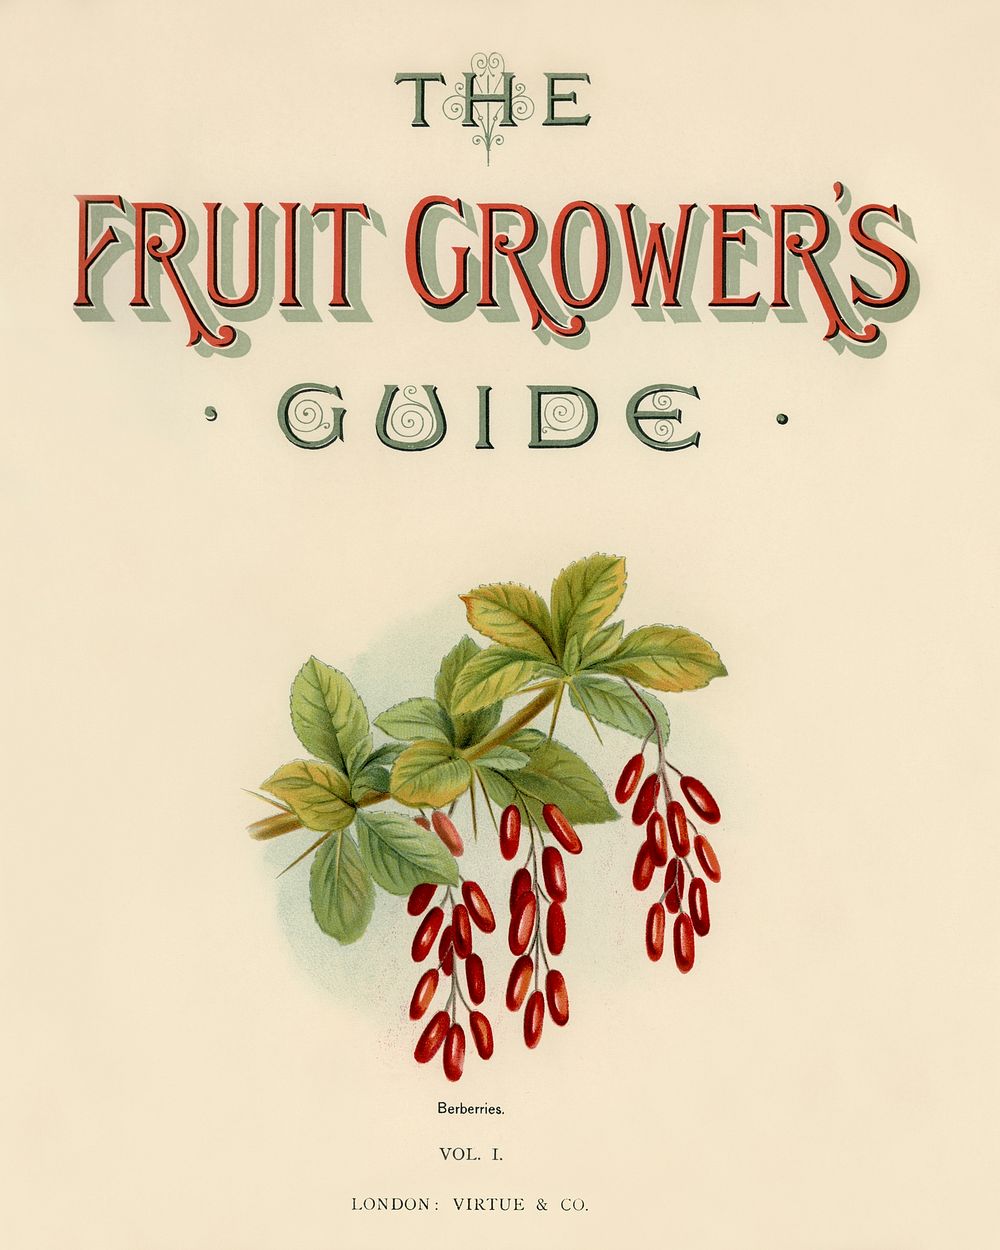 Vintage illustration of fruit grower's guide digitally enhanced from our own vintage edition of The Fruit Grower's Guide…